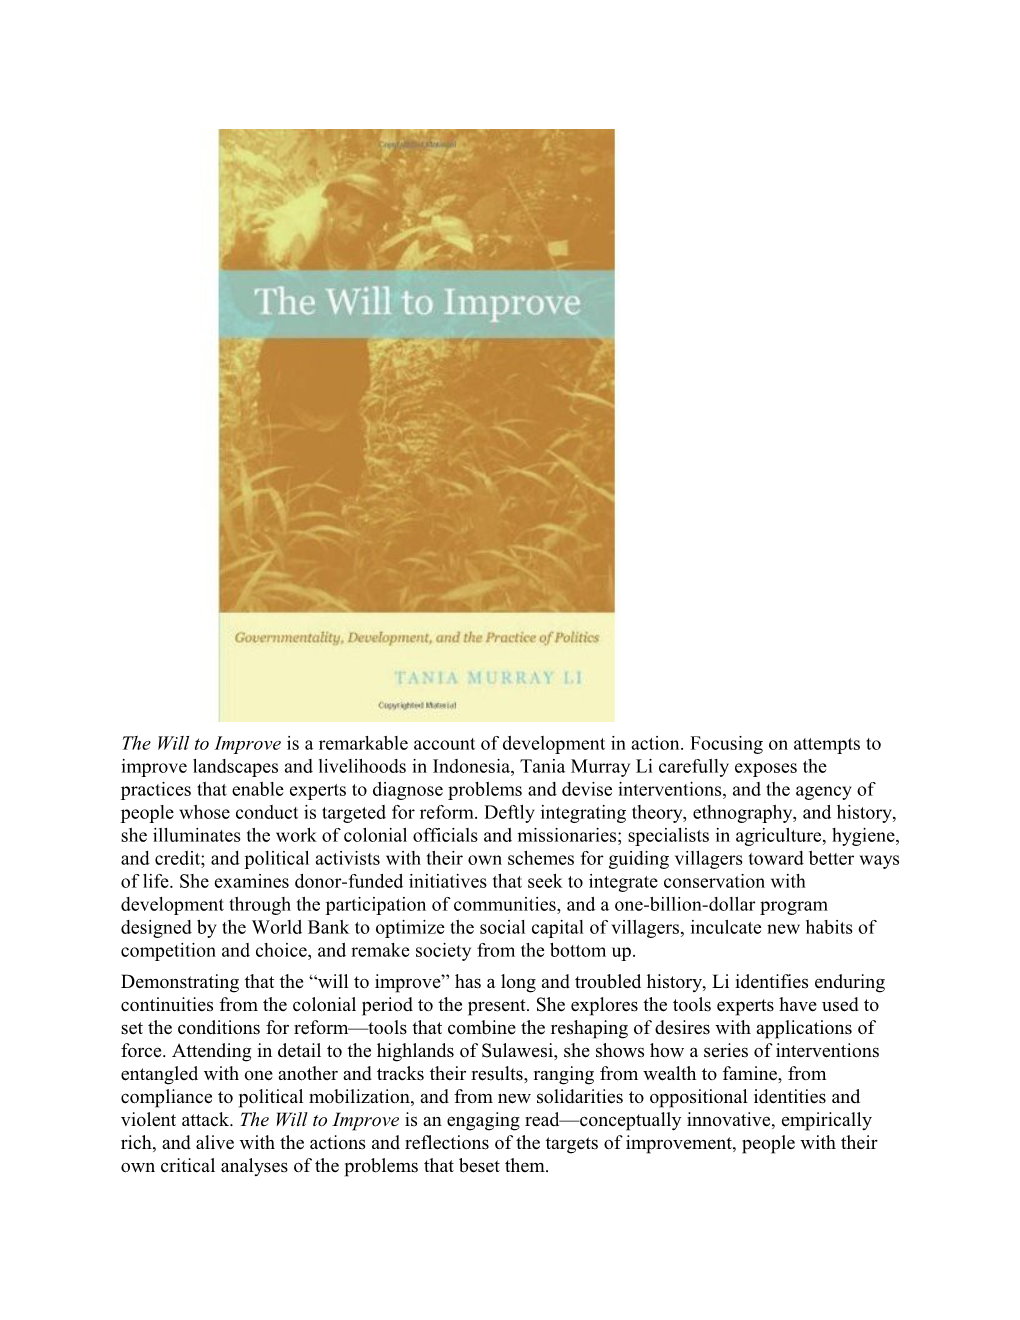 The Will to Improveis a Remarkable Account of Development in Action. Focusing on Attempts